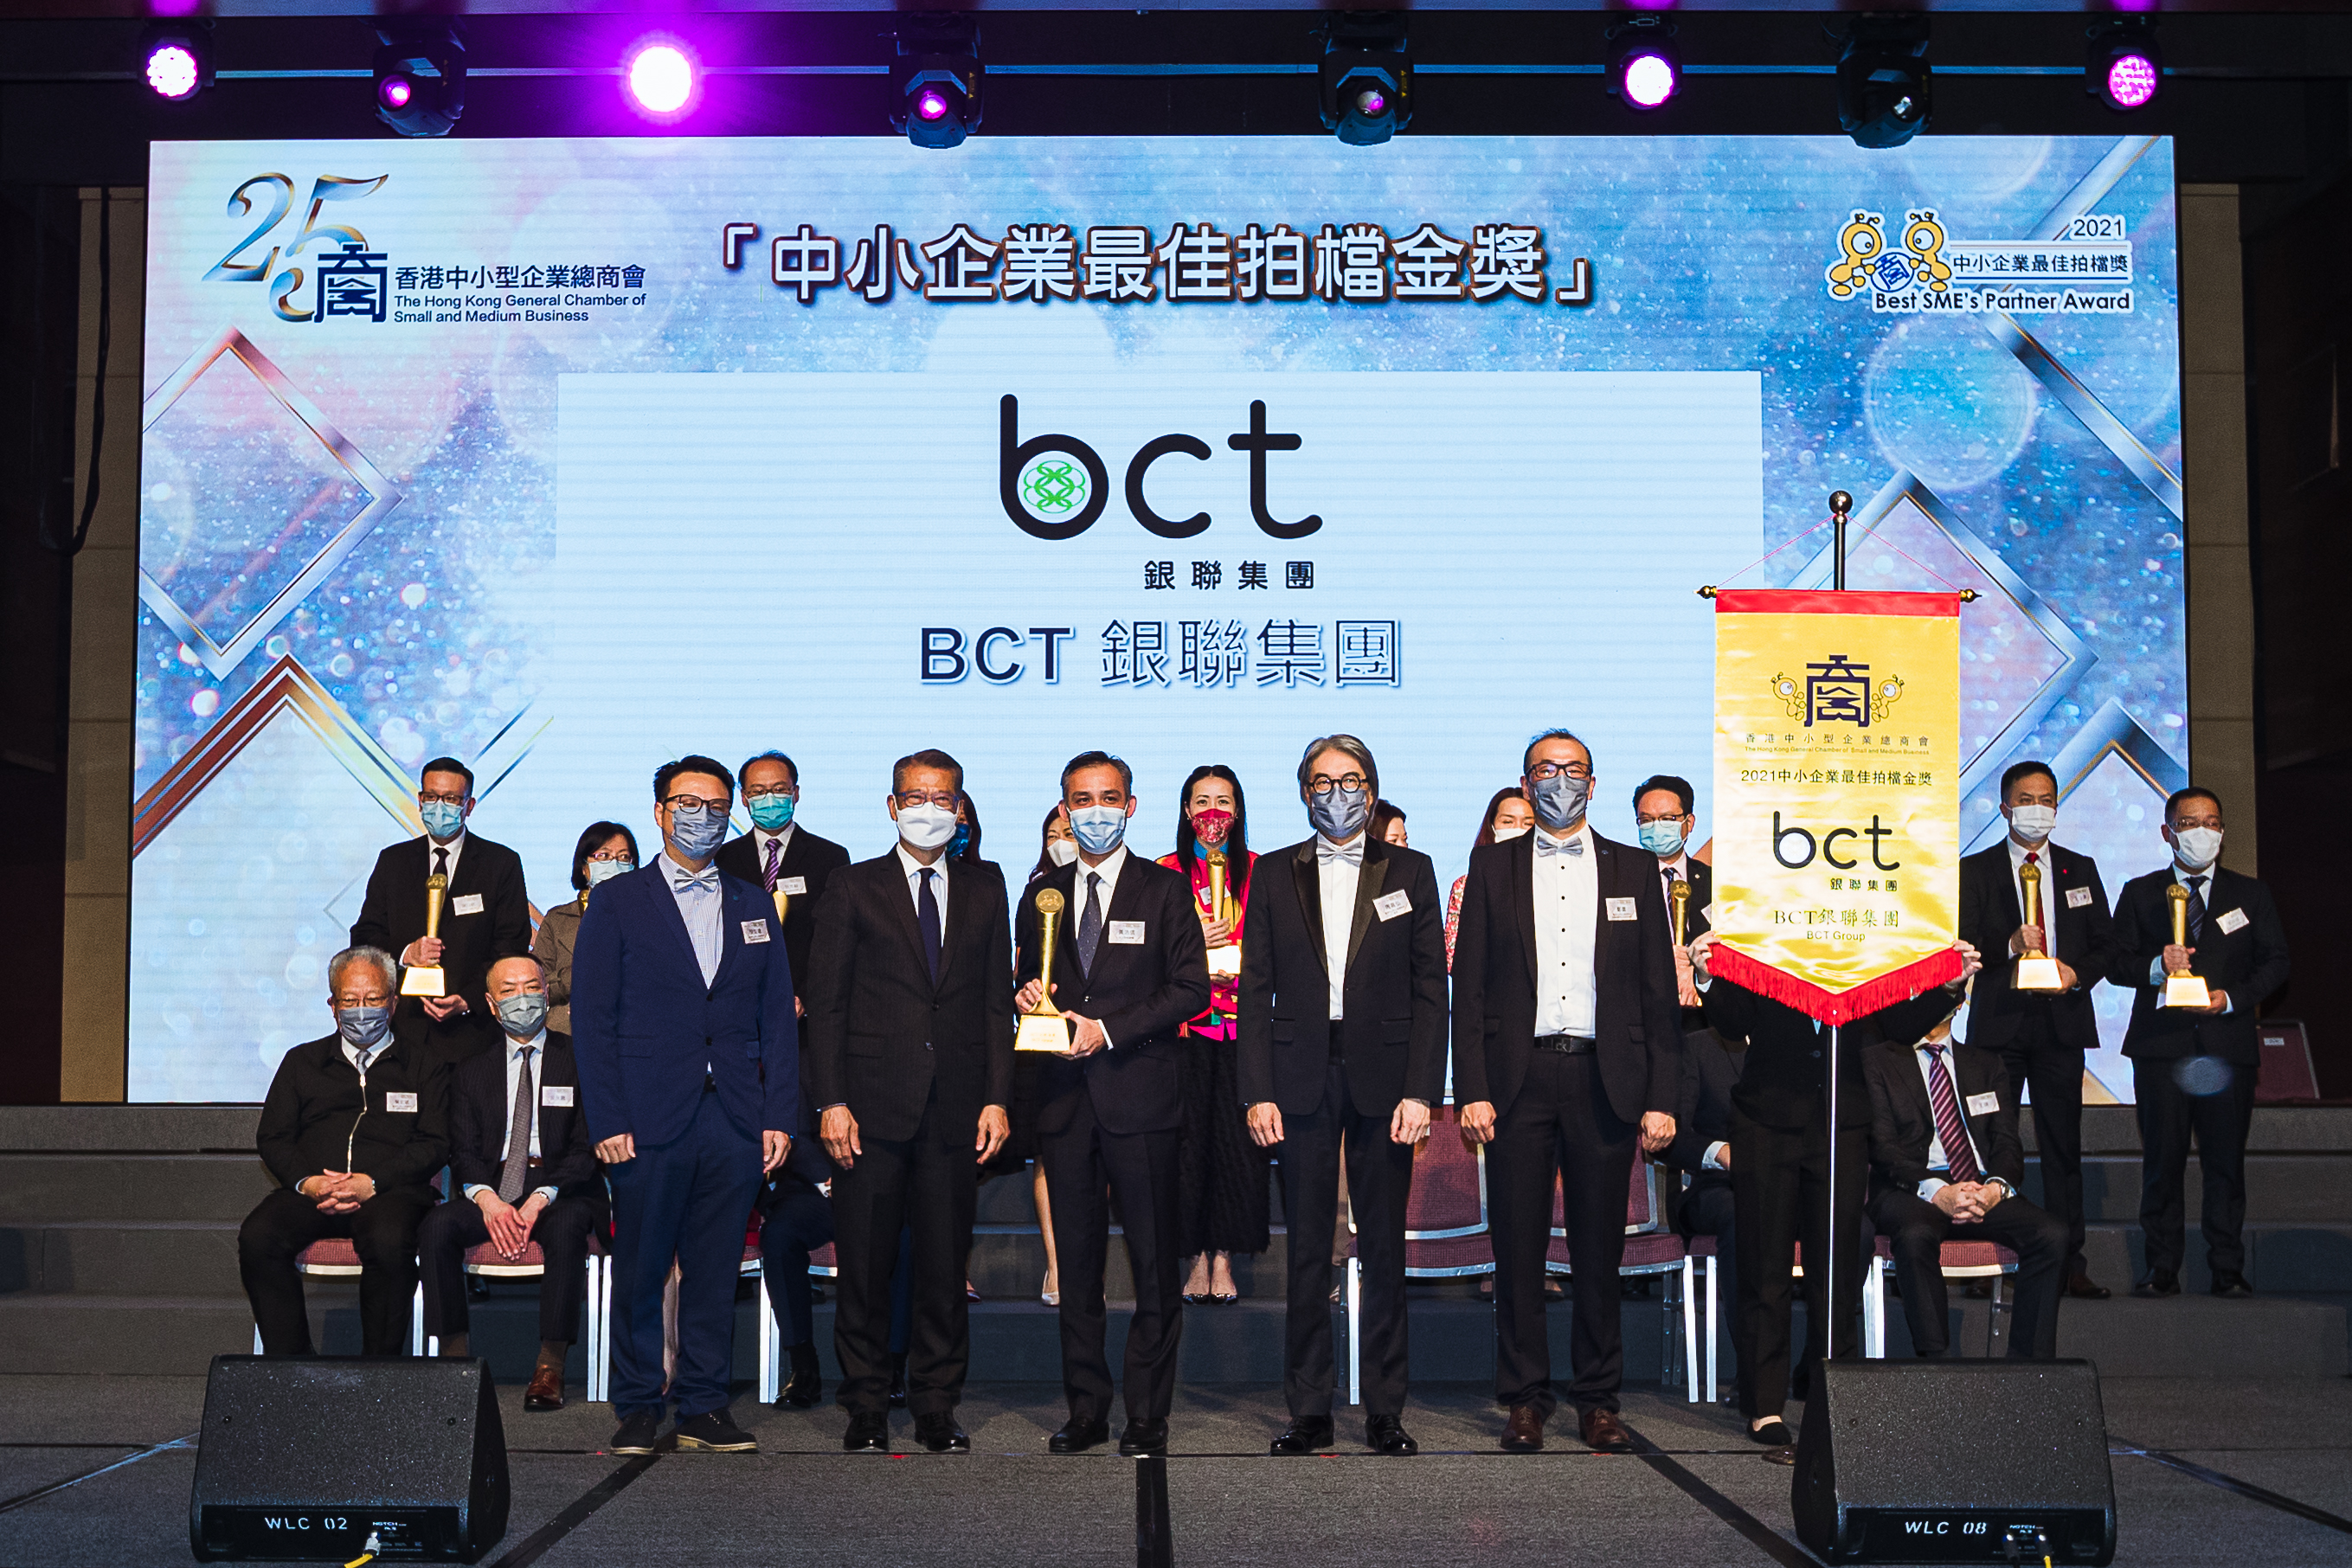 BCT Won the Best SME’s Partner Gold Award for 2 Consecutive Years